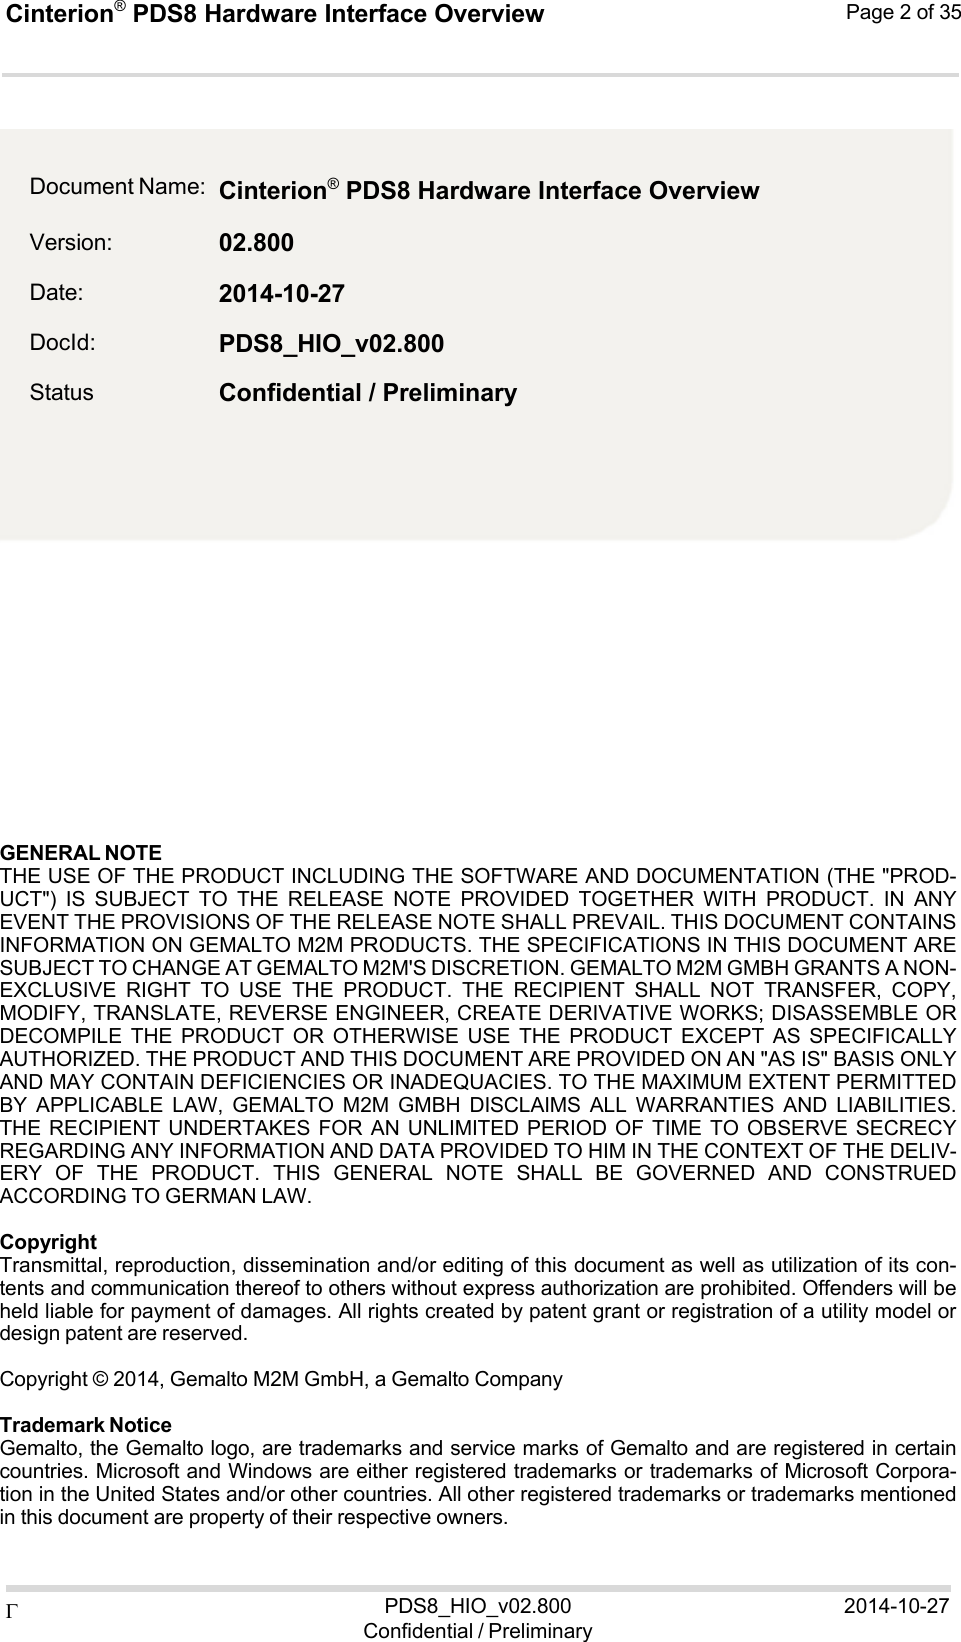 Cinterion®  PDS8 Hardware Interface Overview Page 2 of 35 PDS8_HIO_v02.800Confidential / Preliminary2014-10-27    2                  GENERAL NOTE THE USE OF THE PRODUCT INCLUDING THE SOFTWARE AND DOCUMENTATION (THE &quot;PROD- UCT&quot;)  IS  SUBJECT  TO  THE  RELEASE  NOTE  PROVIDED  TOGETHER  WITH  PRODUCT.  IN  ANY EVENT THE PROVISIONS OF THE RELEASE NOTE SHALL PREVAIL. THIS DOCUMENT CONTAINS INFORMATION ON GEMALTO M2M PRODUCTS. THE SPECIFICATIONS IN THIS DOCUMENT ARE SUBJECT TO CHANGE AT GEMALTO M2M&apos;S DISCRETION. GEMALTO M2M GMBH GRANTS A NON- EXCLUSIVE  RIGHT  TO  USE  THE  PRODUCT.  THE  RECIPIENT  SHALL  NOT  TRANSFER,  COPY, MODIFY, TRANSLATE, REVERSE ENGINEER, CREATE DERIVATIVE WORKS; DISASSEMBLE OR DECOMPILE  THE  PRODUCT  OR  OTHERWISE  USE  THE  PRODUCT  EXCEPT  AS  SPECIFICALLY AUTHORIZED. THE PRODUCT AND THIS DOCUMENT ARE PROVIDED ON AN &quot;AS IS&quot; BASIS ONLY AND MAY CONTAIN DEFICIENCIES OR INADEQUACIES. TO THE MAXIMUM EXTENT PERMITTED BY  APPLICABLE  LAW,  GEMALTO  M2M  GMBH  DISCLAIMS  ALL  WARRANTIES  AND  LIABILITIES. THE RECIPIENT UNDERTAKES FOR AN UNLIMITED PERIOD OF  TIME  TO  OBSERVE SECRECY REGARDING ANY INFORMATION AND DATA PROVIDED TO HIM IN THE CONTEXT OF THE DELIV- ERY  OF  THE  PRODUCT.  THIS  GENERAL  NOTE  SHALL  BE  GOVERNED  AND  CONSTRUED ACCORDING TO GERMAN LAW.  Copyright Transmittal, reproduction, dissemination and/or editing of this document as well as utilization of its con- tents and communication thereof to others without express authorization are prohibited. Offenders will be held liable for payment of damages. All rights created by patent grant or registration of a utility model or design patent are reserved.  Copyright © 2014, Gemalto M2M GmbH, a Gemalto Company  Trademark Notice Gemalto, the Gemalto logo, are trademarks and service marks of Gemalto and are registered in certain countries. Microsoft and Windows are either registered trademarks or trademarks of Microsoft Corpora- tion in the United States and/or other countries. All other registered trademarks or trademarks mentioned in this document are property of their respective owners. Document Name: Version: Date: DocId: Status Cinterion® PDS8 Hardware Interface Overview 02.800 2014-10-27 PDS8_HIO_v02.800 Confidential / Preliminary 